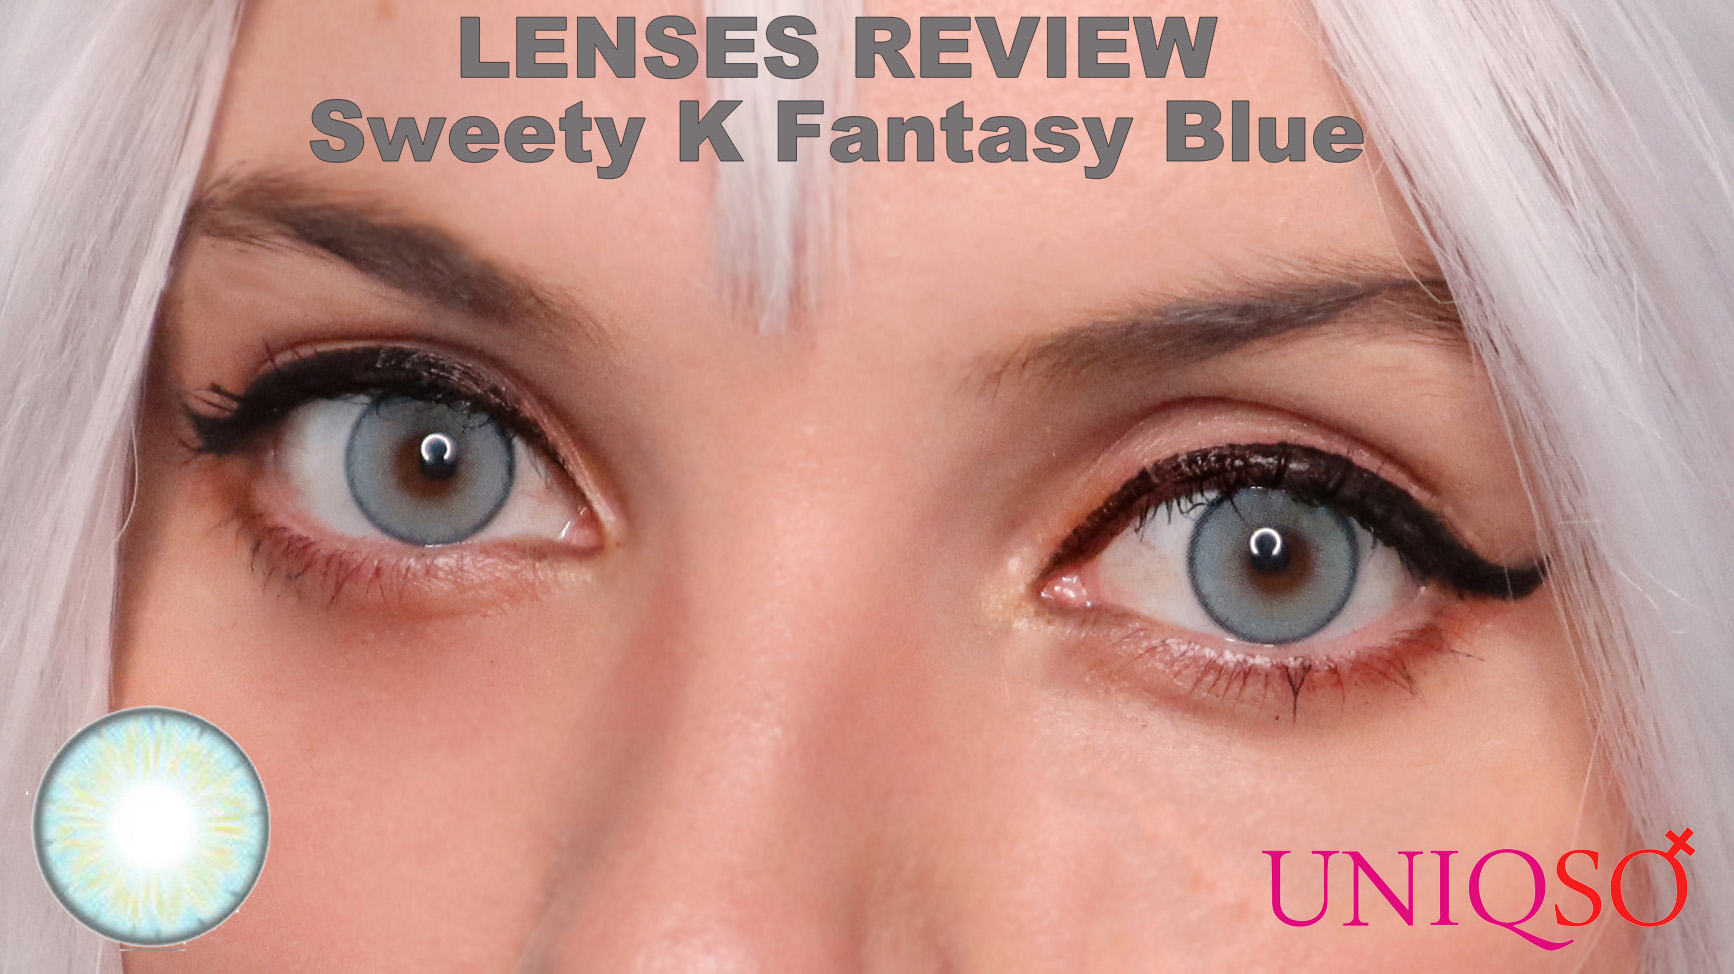 Lenses Review: Sweety K Fantasy Blue from Uniqso